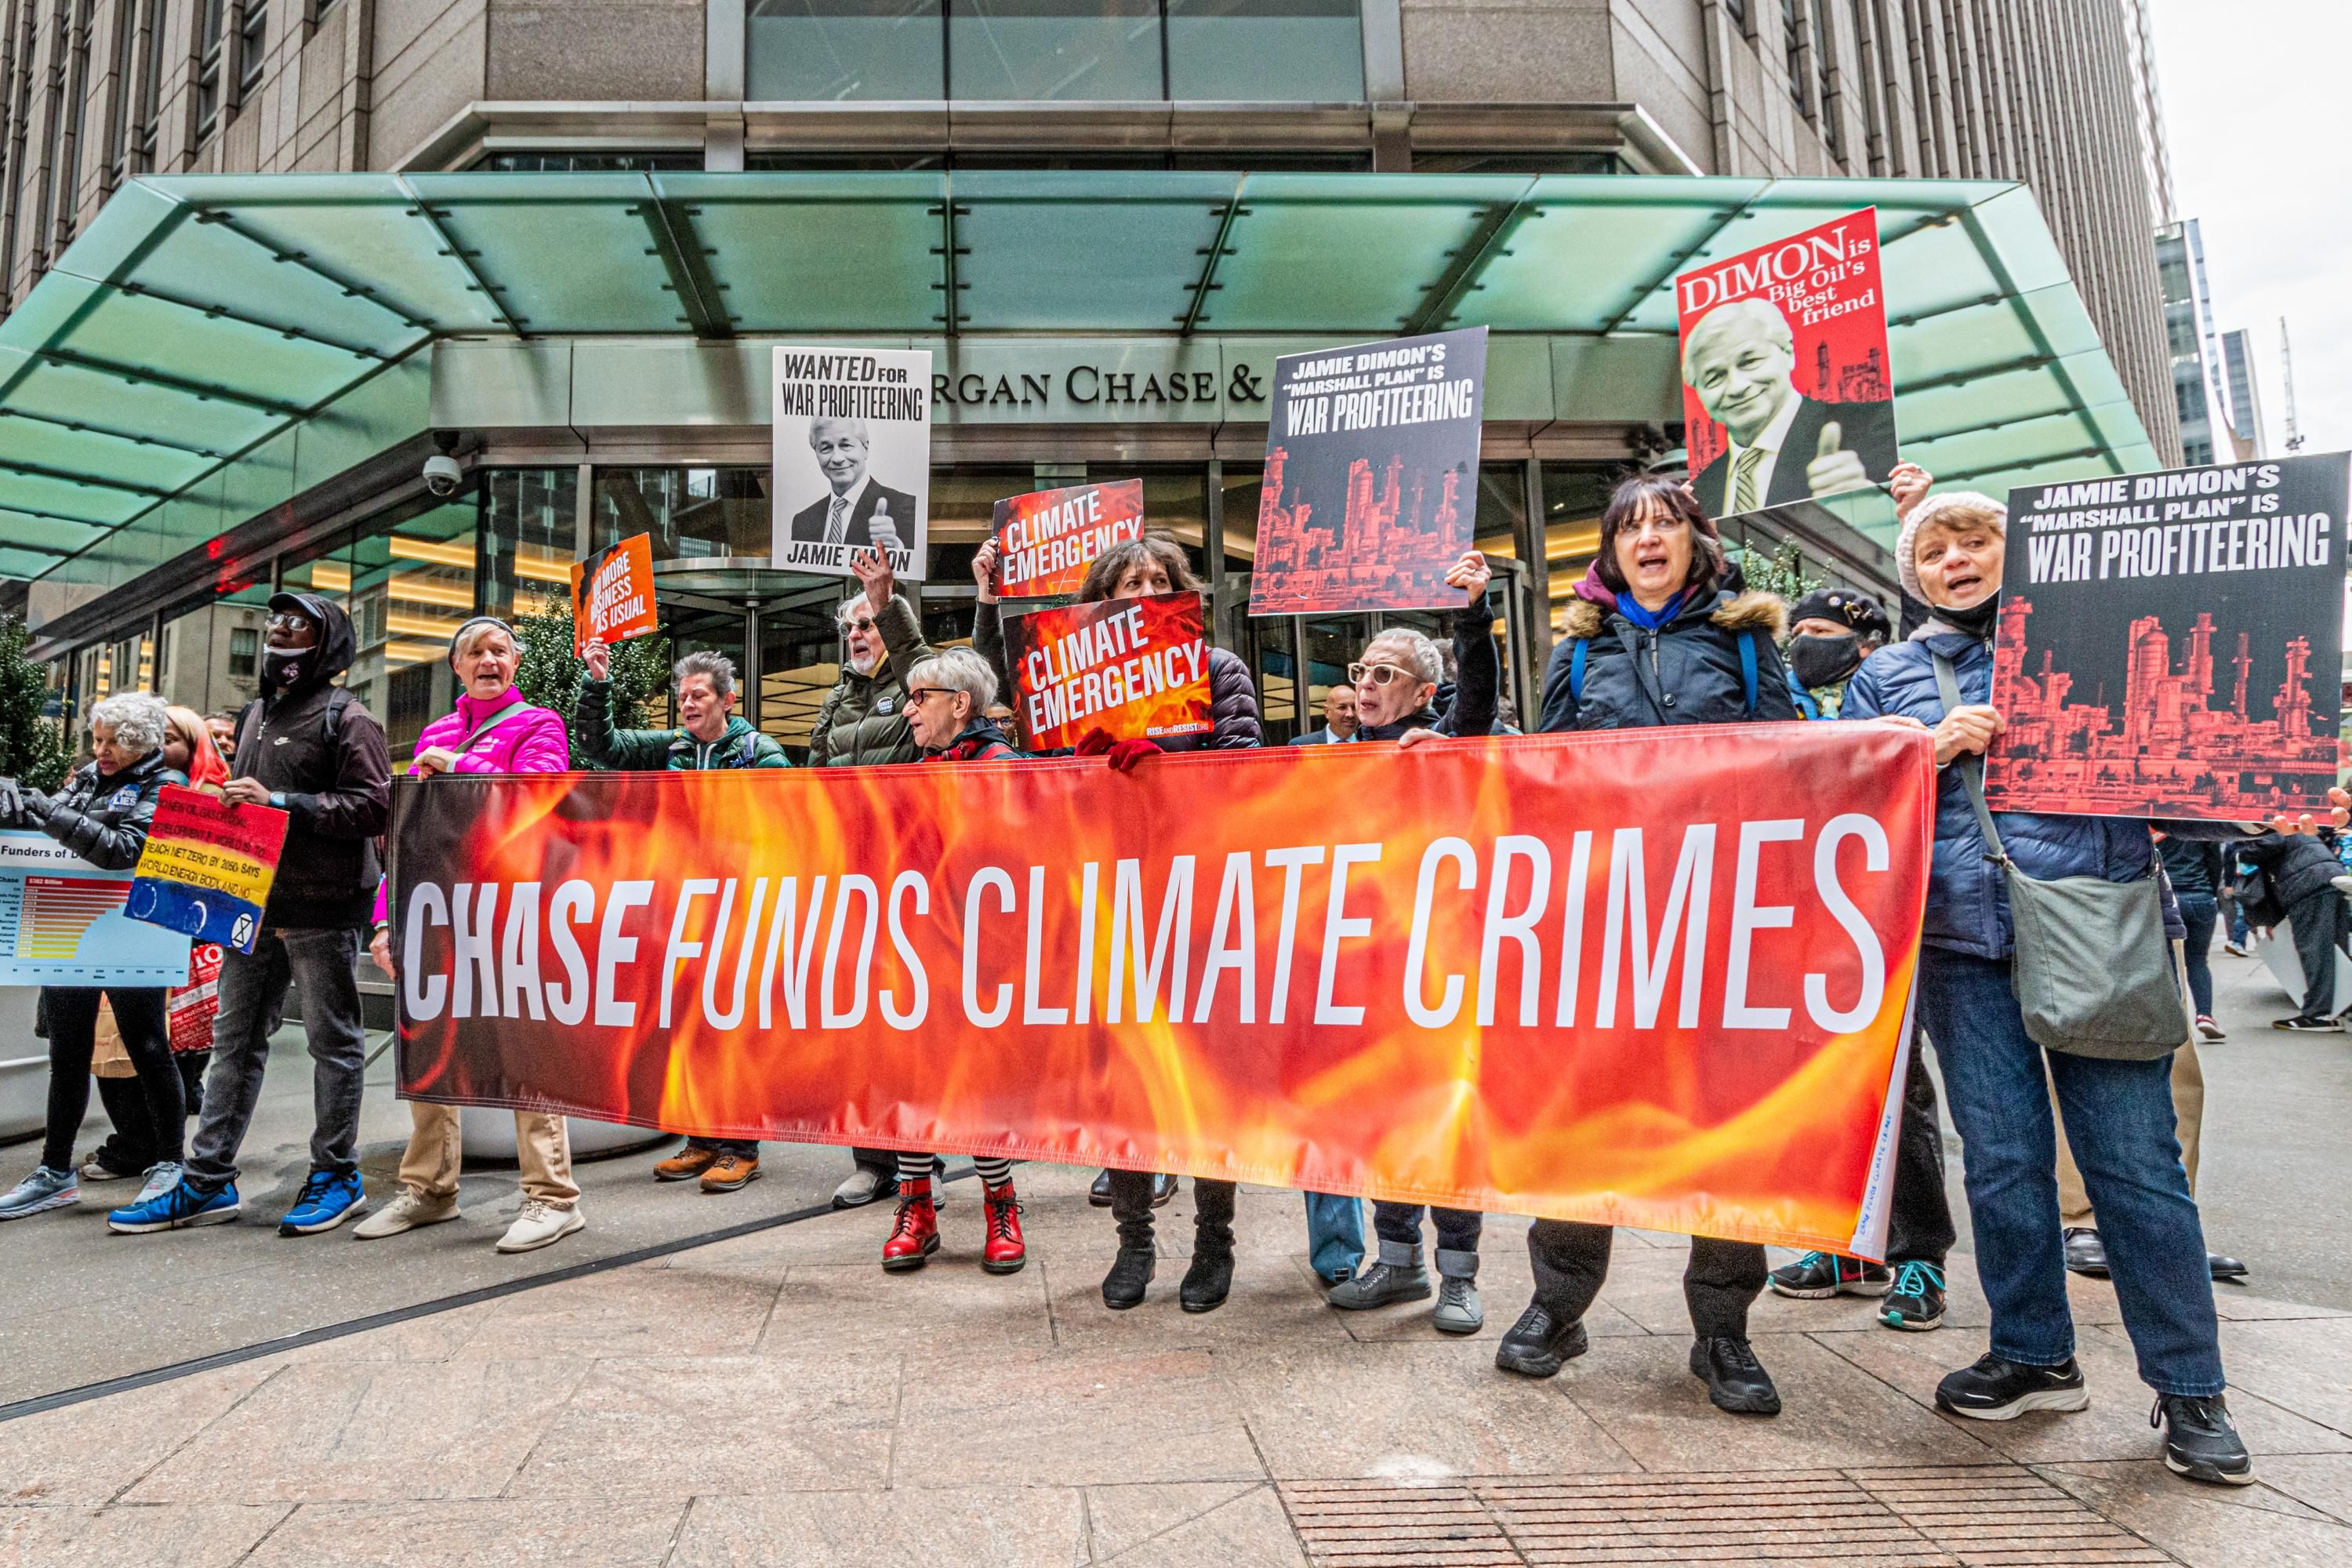 Protesters with banner reading, "Chase funds climate crimes"